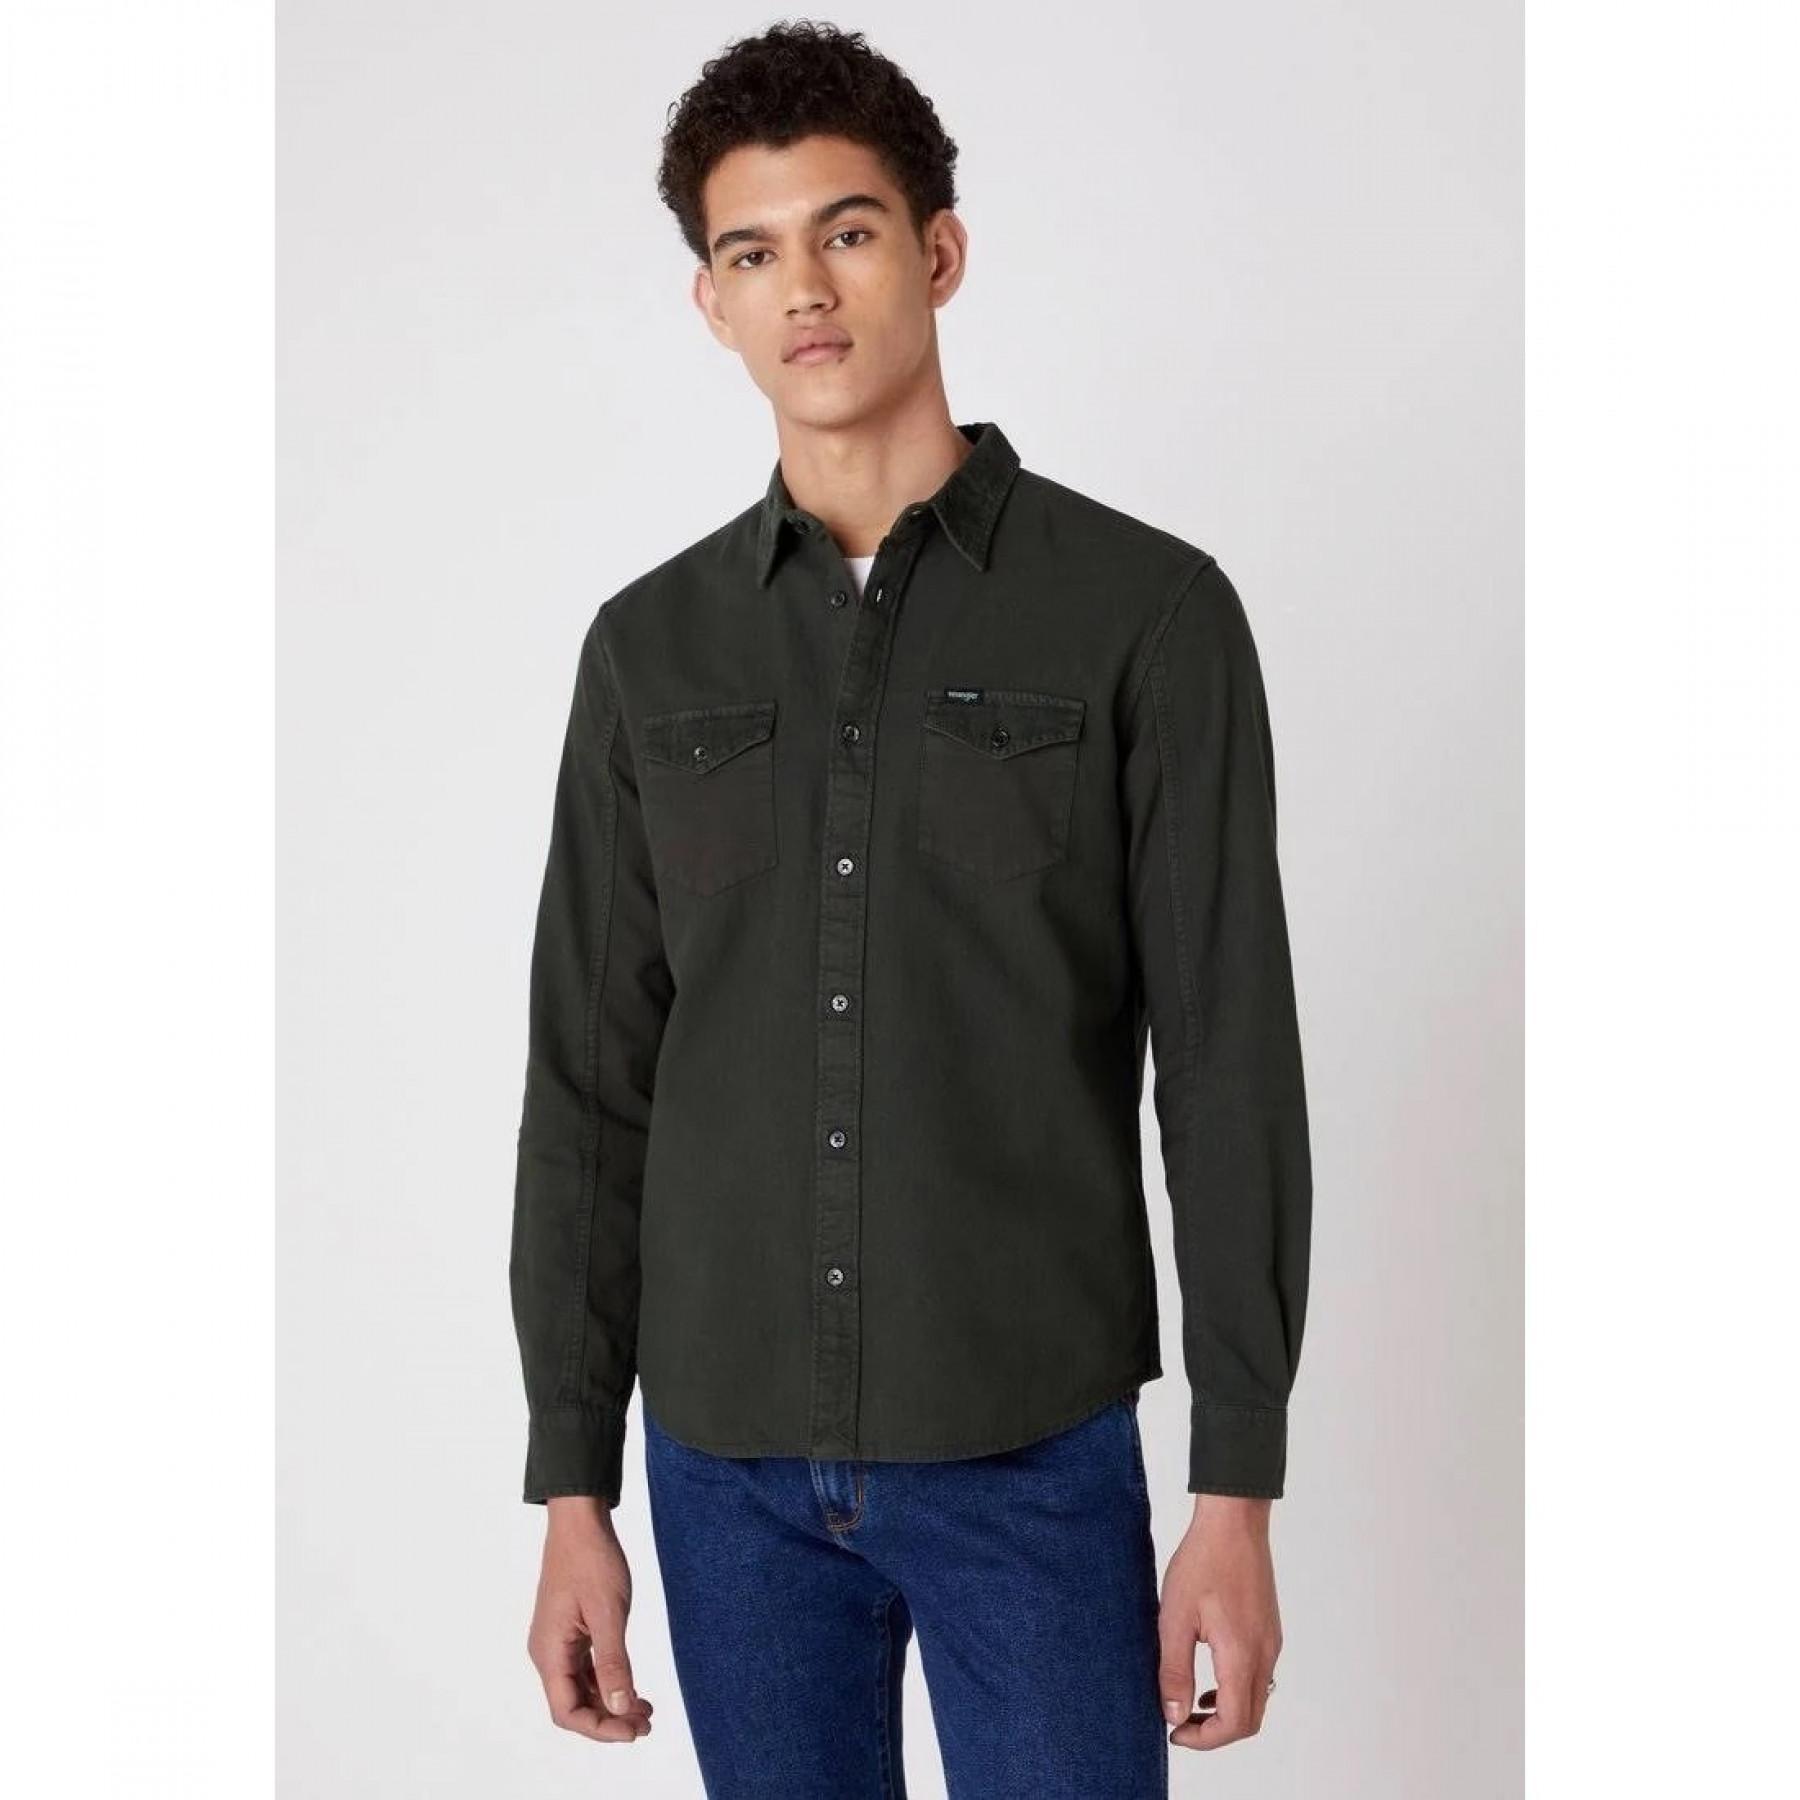 Wranger shirt with rifle pockets